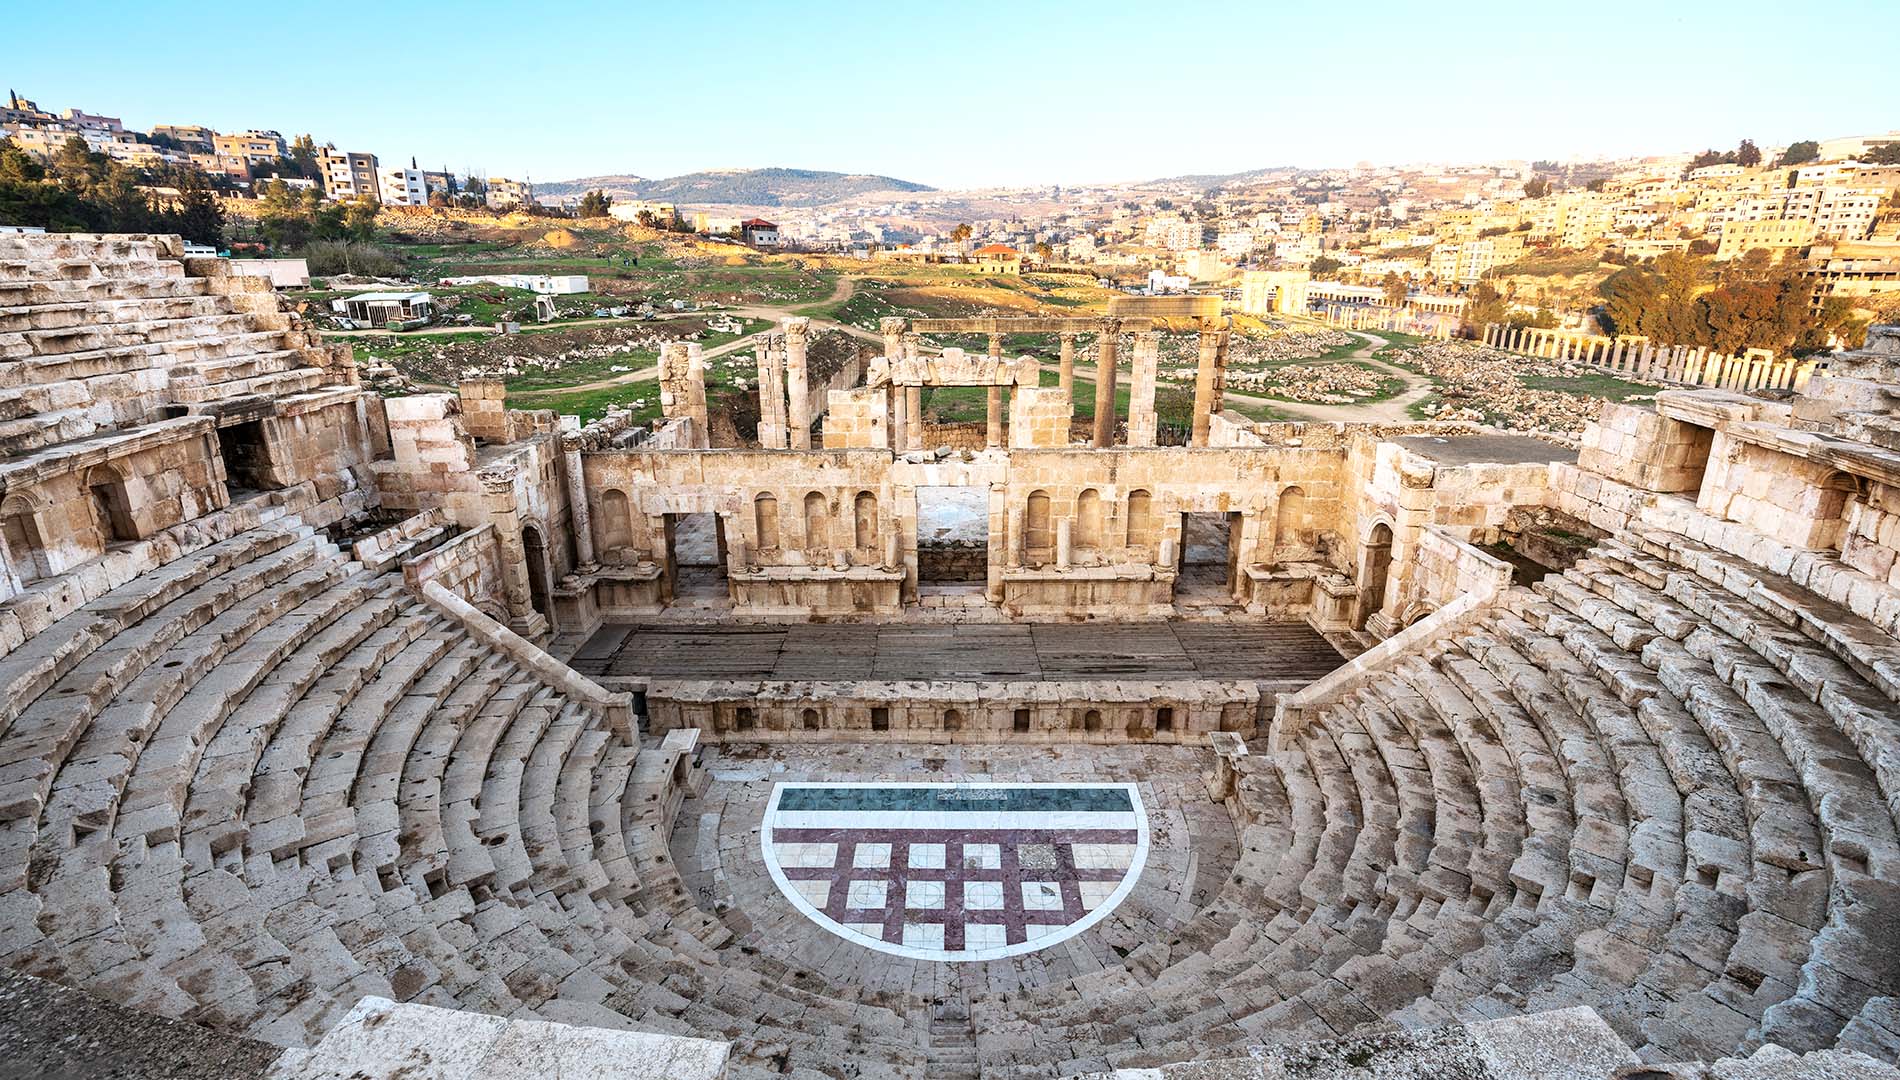 The Jordan Less Traveled: 5 Great (and Unexpected) Day Trips from Amman, Jordan